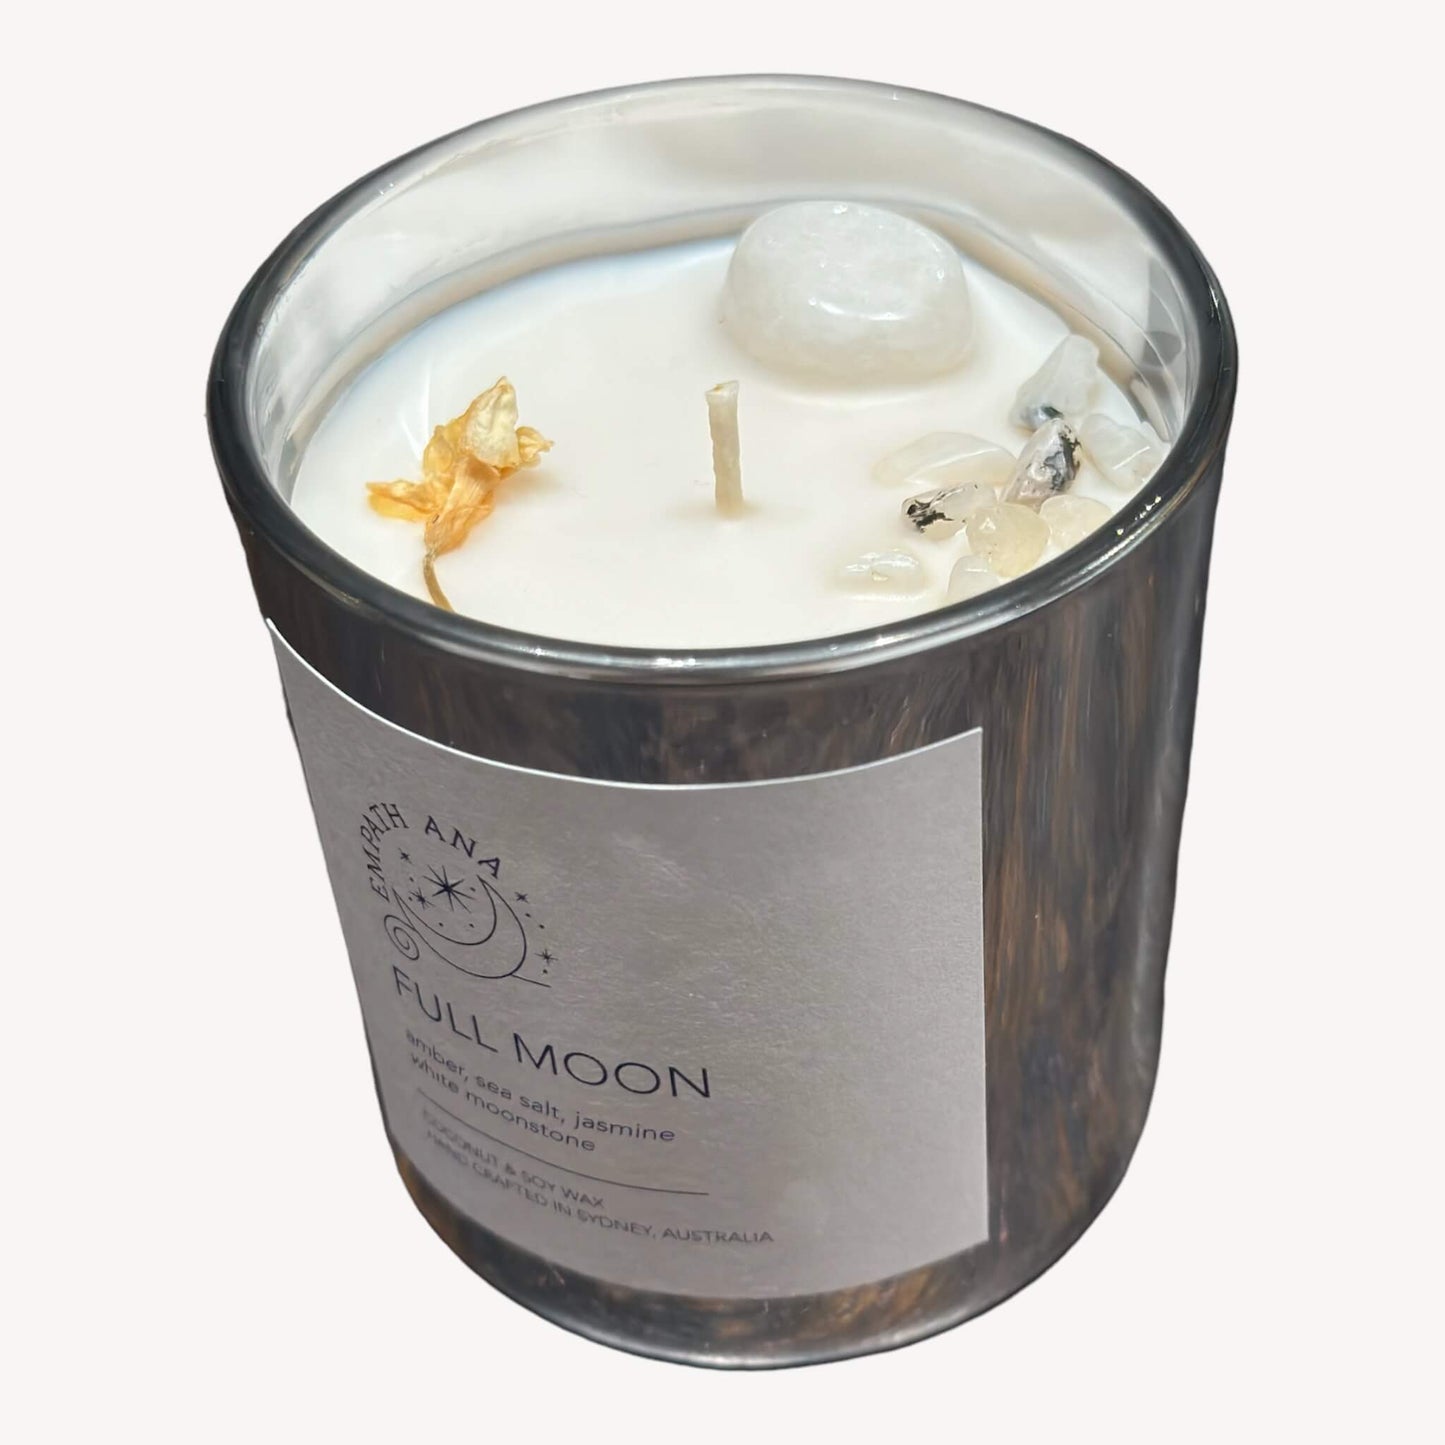 Top view of Empath Ana's Full Moon Crystal Candle in the Medium size (200mls). Ethereal White/Rainbow Moonstone crystals adorn the top, enhancing the celestial energy. The invigorating blend of Amber, Sea Salt, and Jasmine invites you to contemplate and celebrate joyous moments.